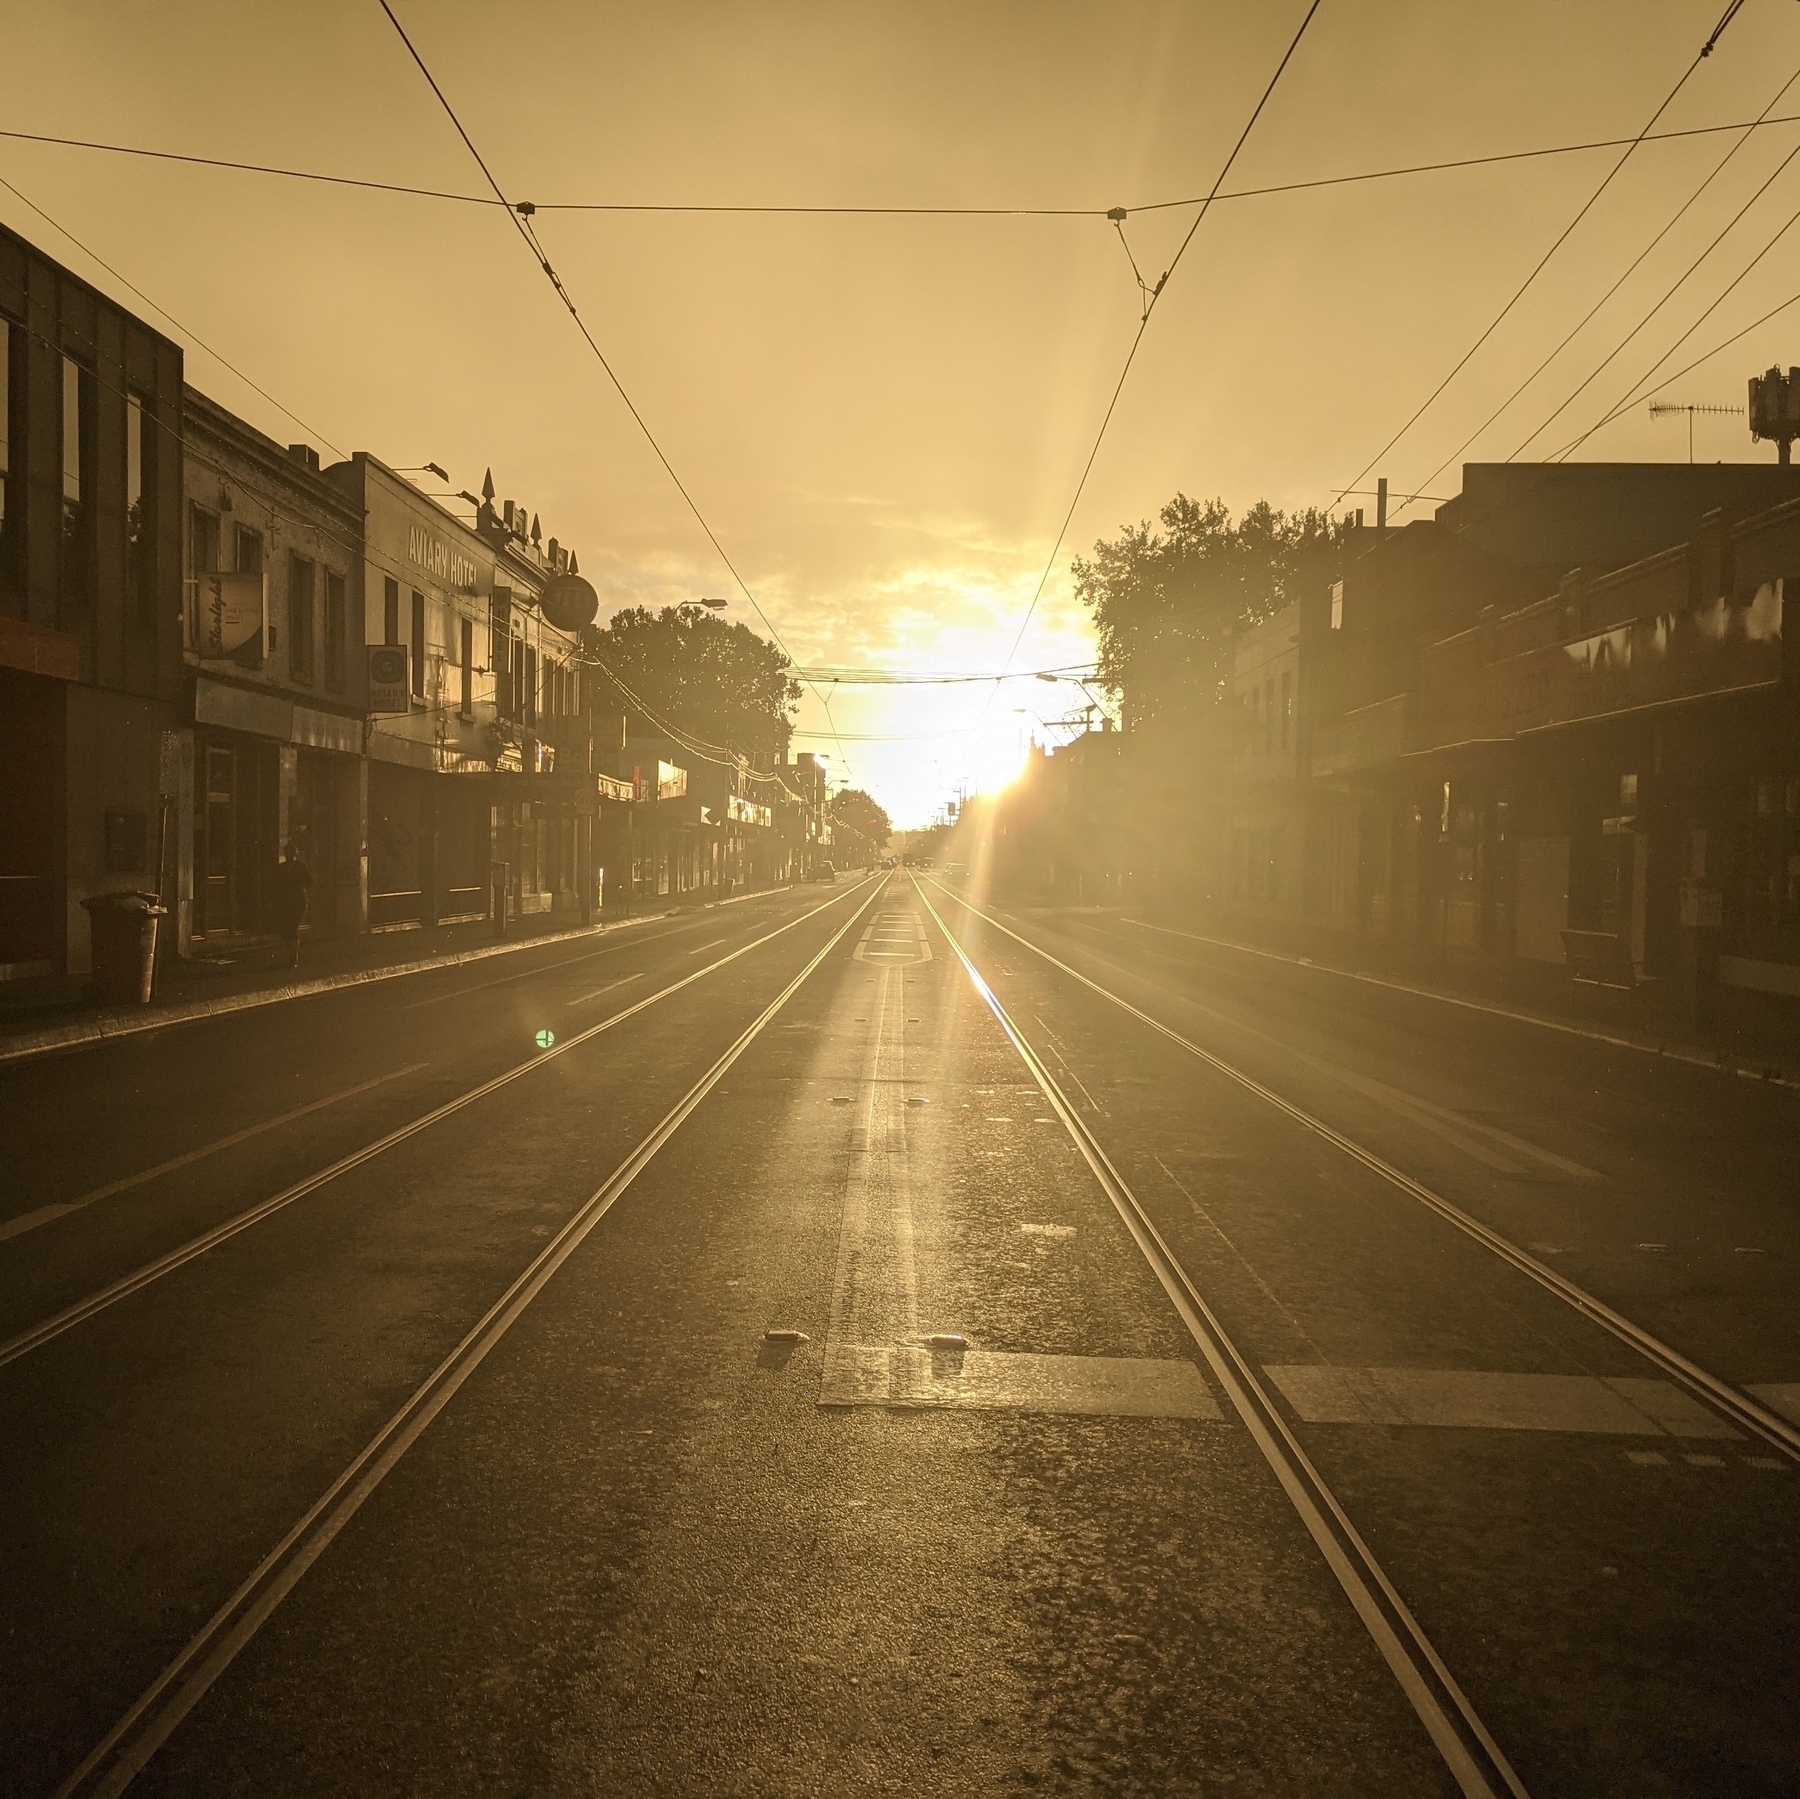 Sun rising on a road with buildings on the sides and tram lines down the center